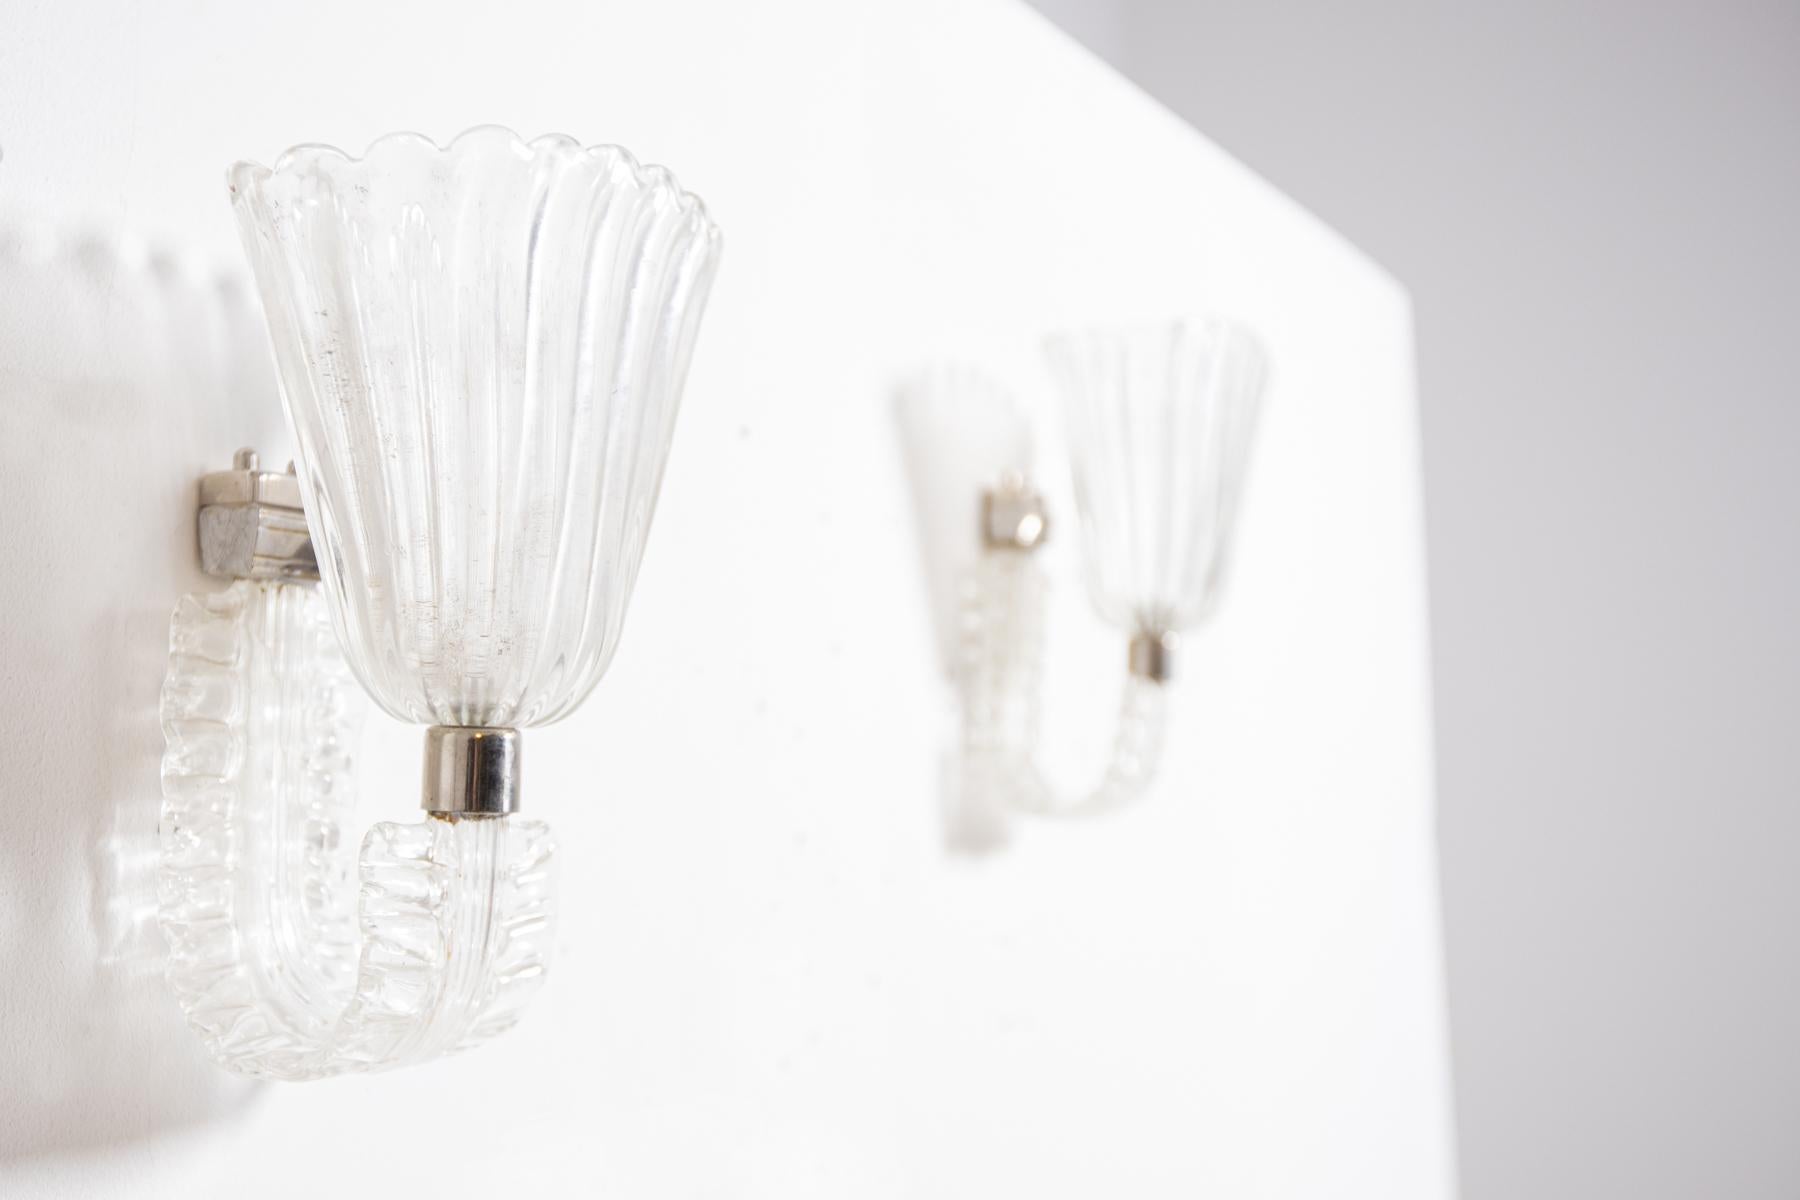 Mid-Century Modern Pair of Wall Lamps by Barovier & Toso in Murano Glass, 1950s